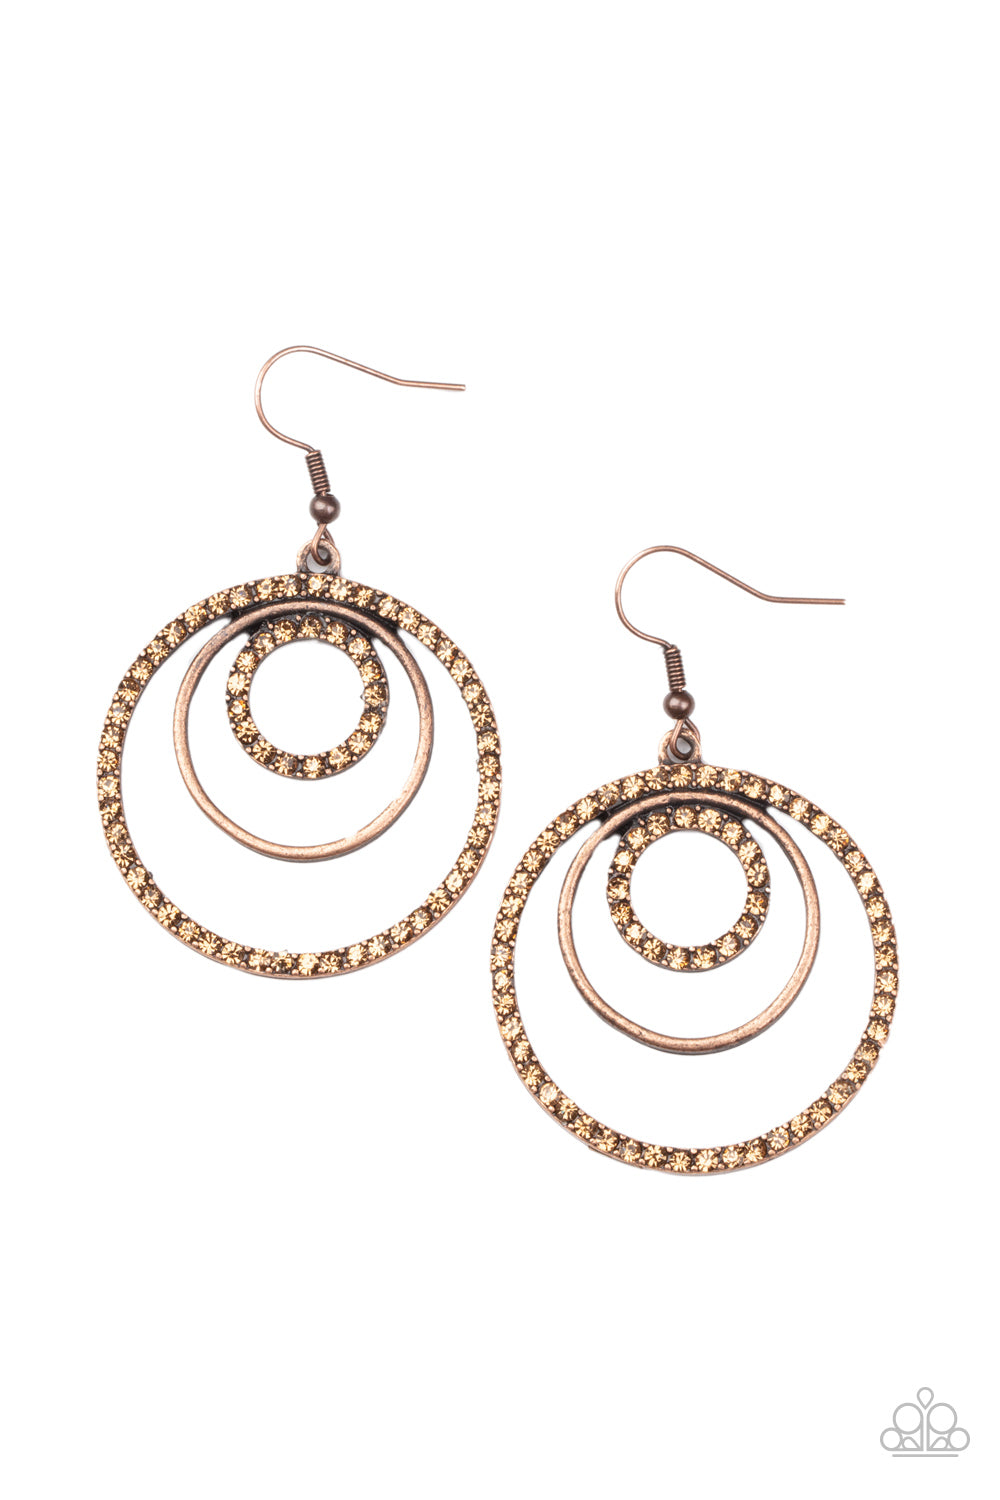 Paparazzi Accessories Bodaciously Bubbly - Copper Earrings - Lady T Accessories